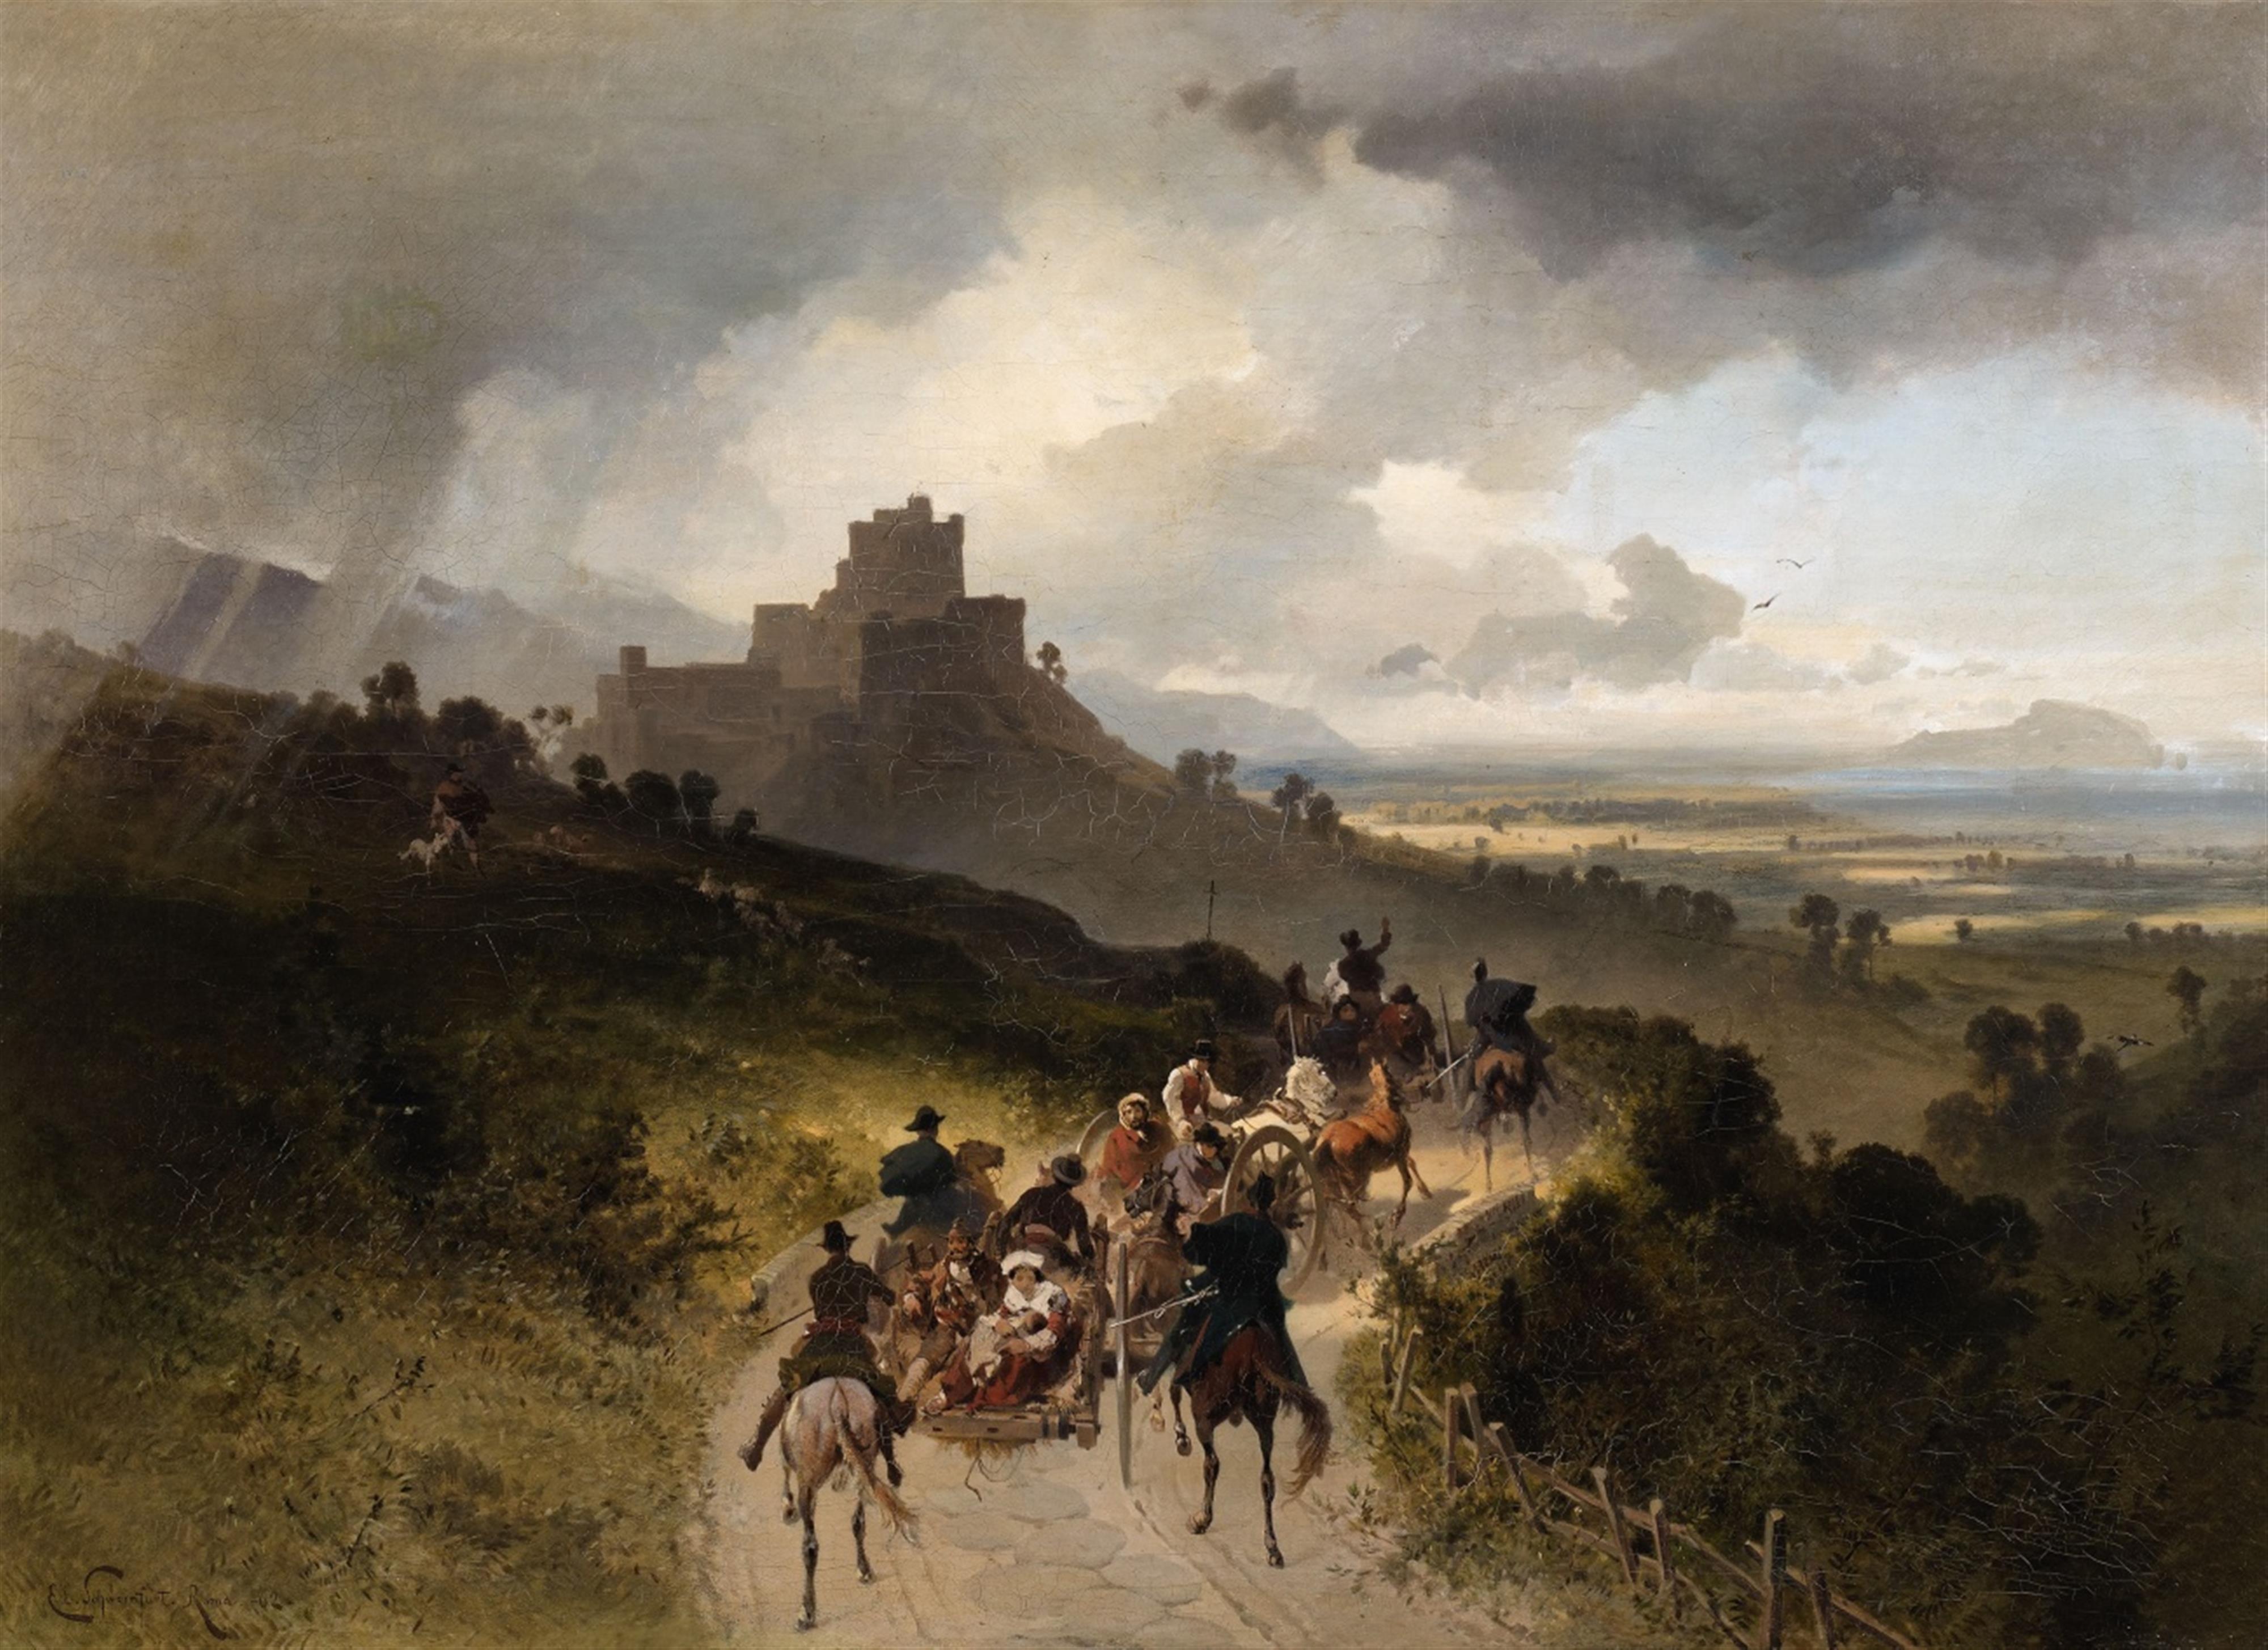 Ernst Schweinfurth - Landscape with a Castle and Wagon - image-1